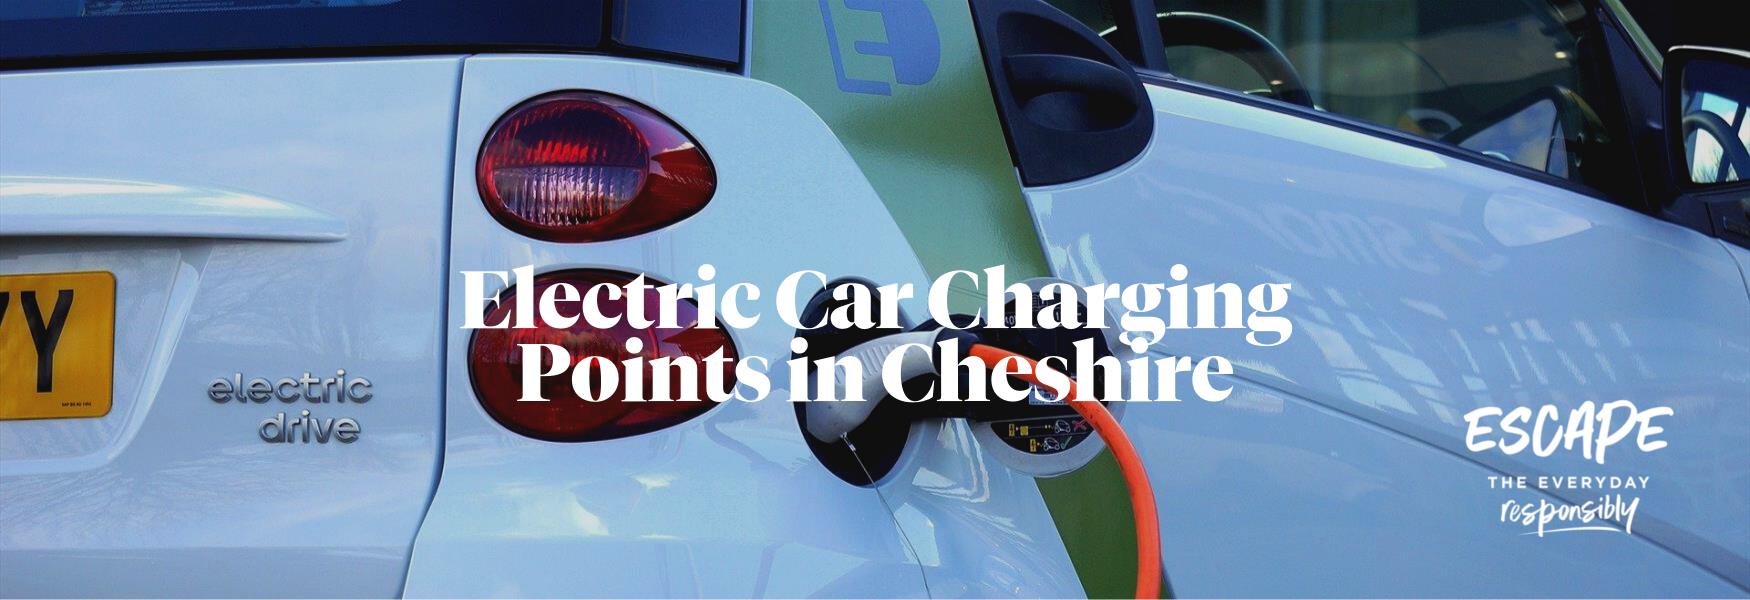 Electric Car Charging Points in Cheshire